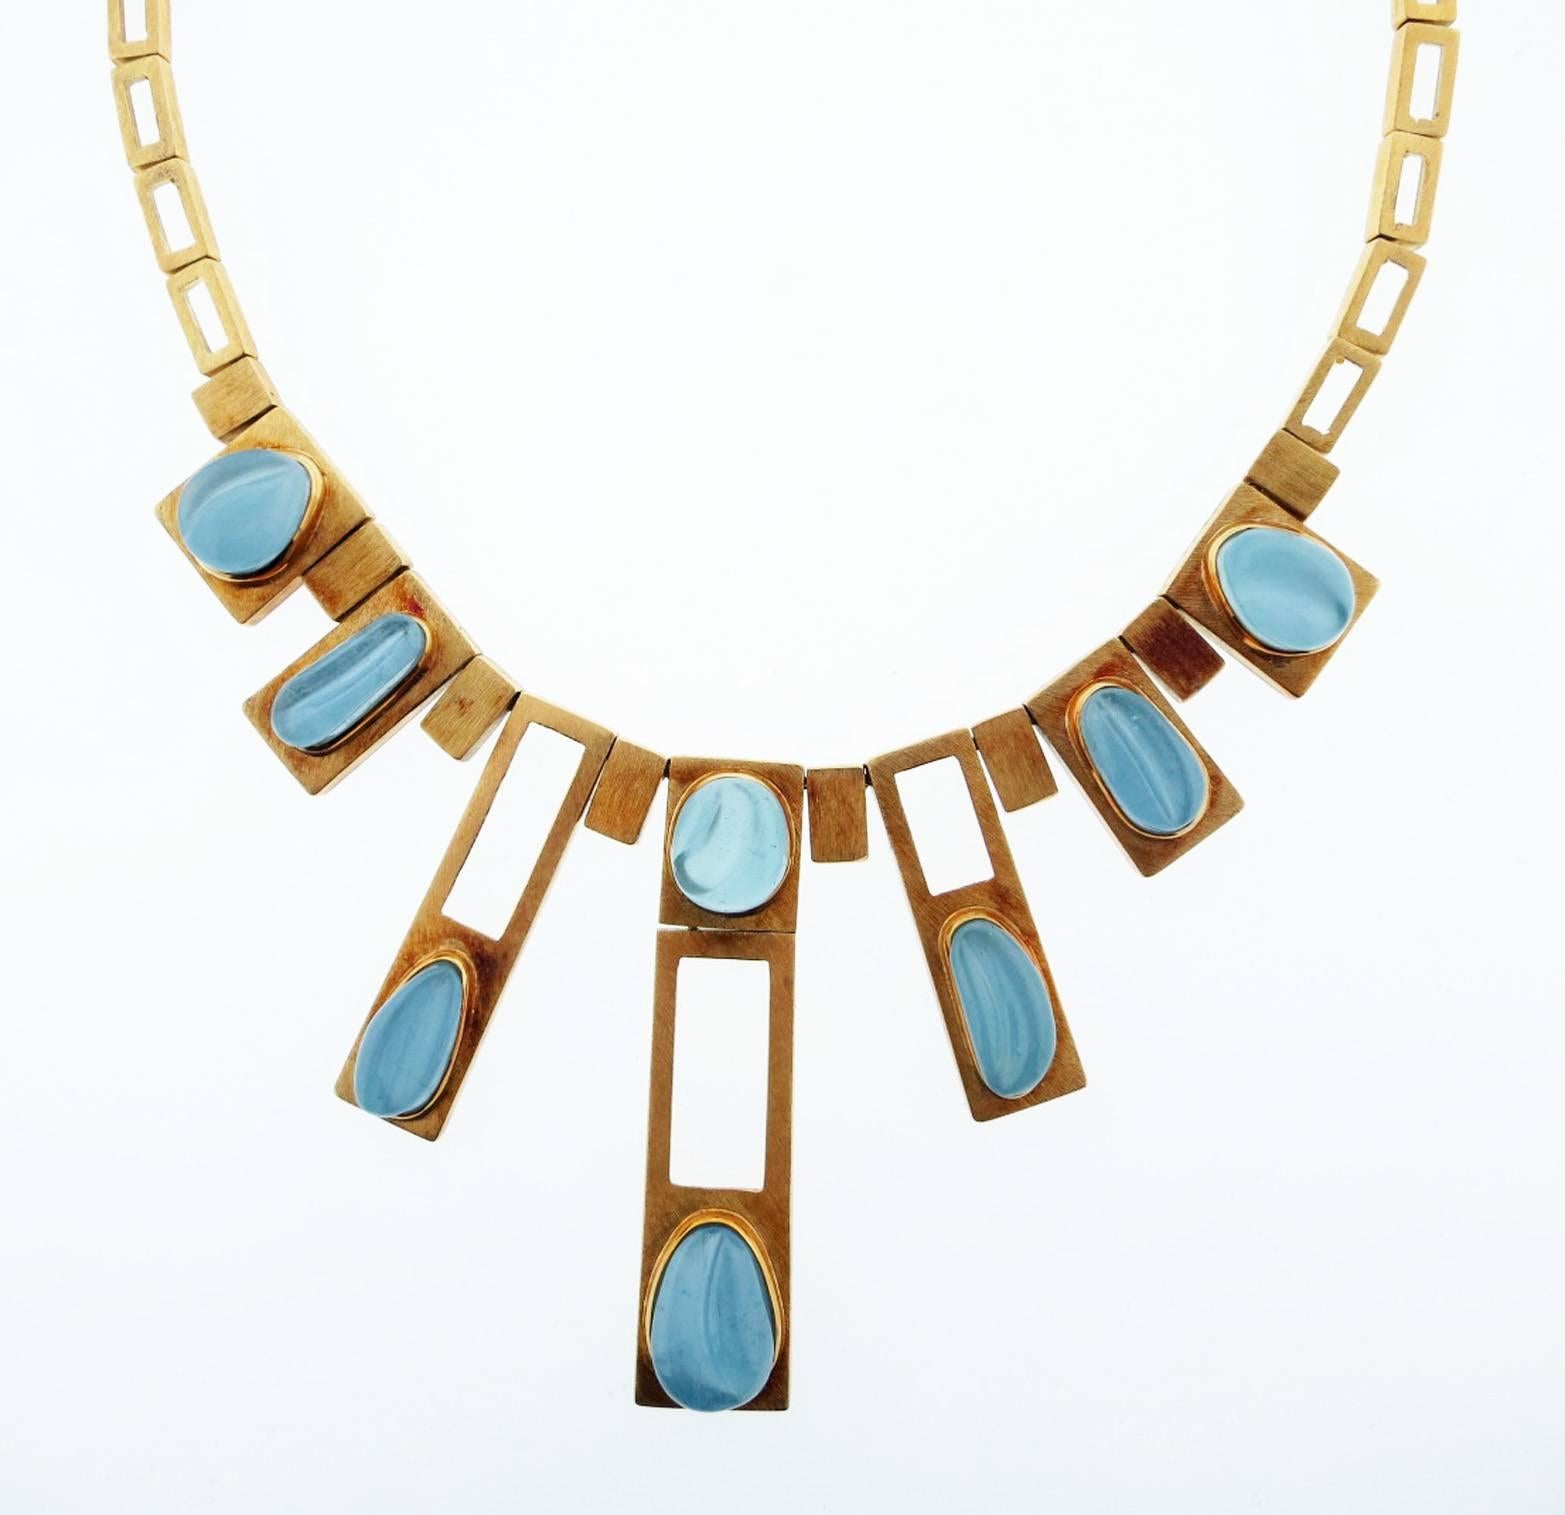 Fabulous modernist design necklace made by the re-nowned Brazilian artisan jeweler Burle Marx circa 1970. The textured finish 18kt.  yellow gold geometric necklace measures 16 inches in length and is set with nine carved natural aquamarines.